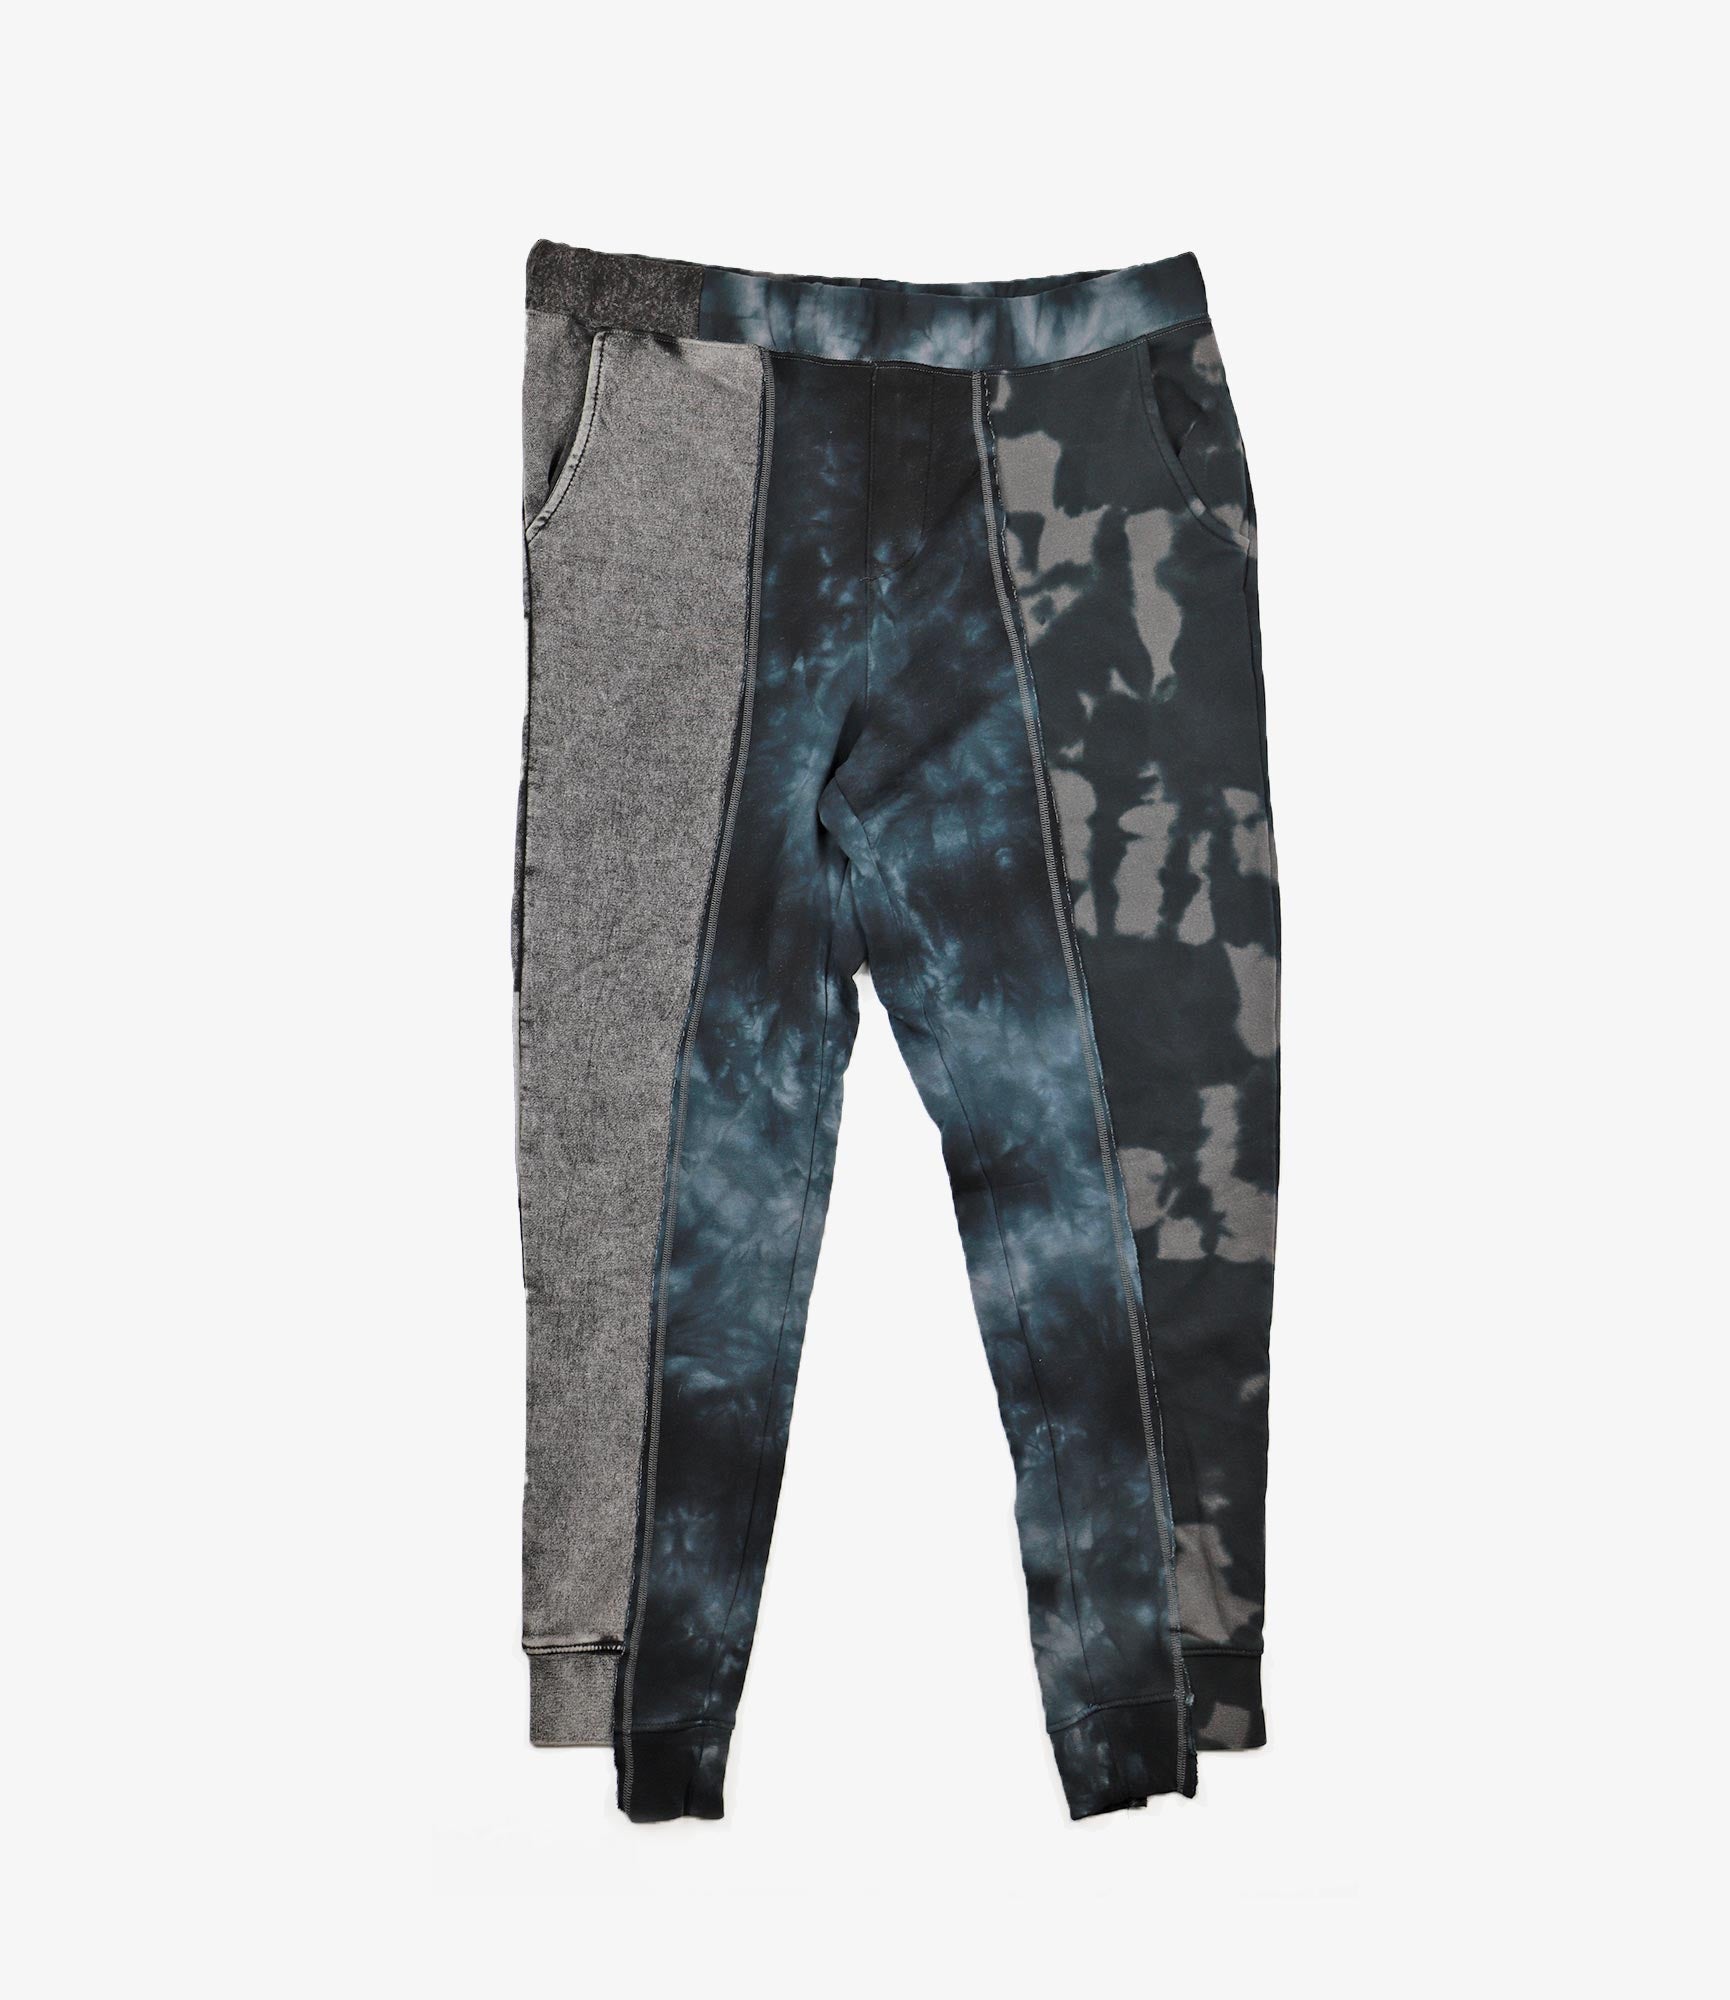 Nepenthes Special Rebuild Sweat Pant - Mishmash